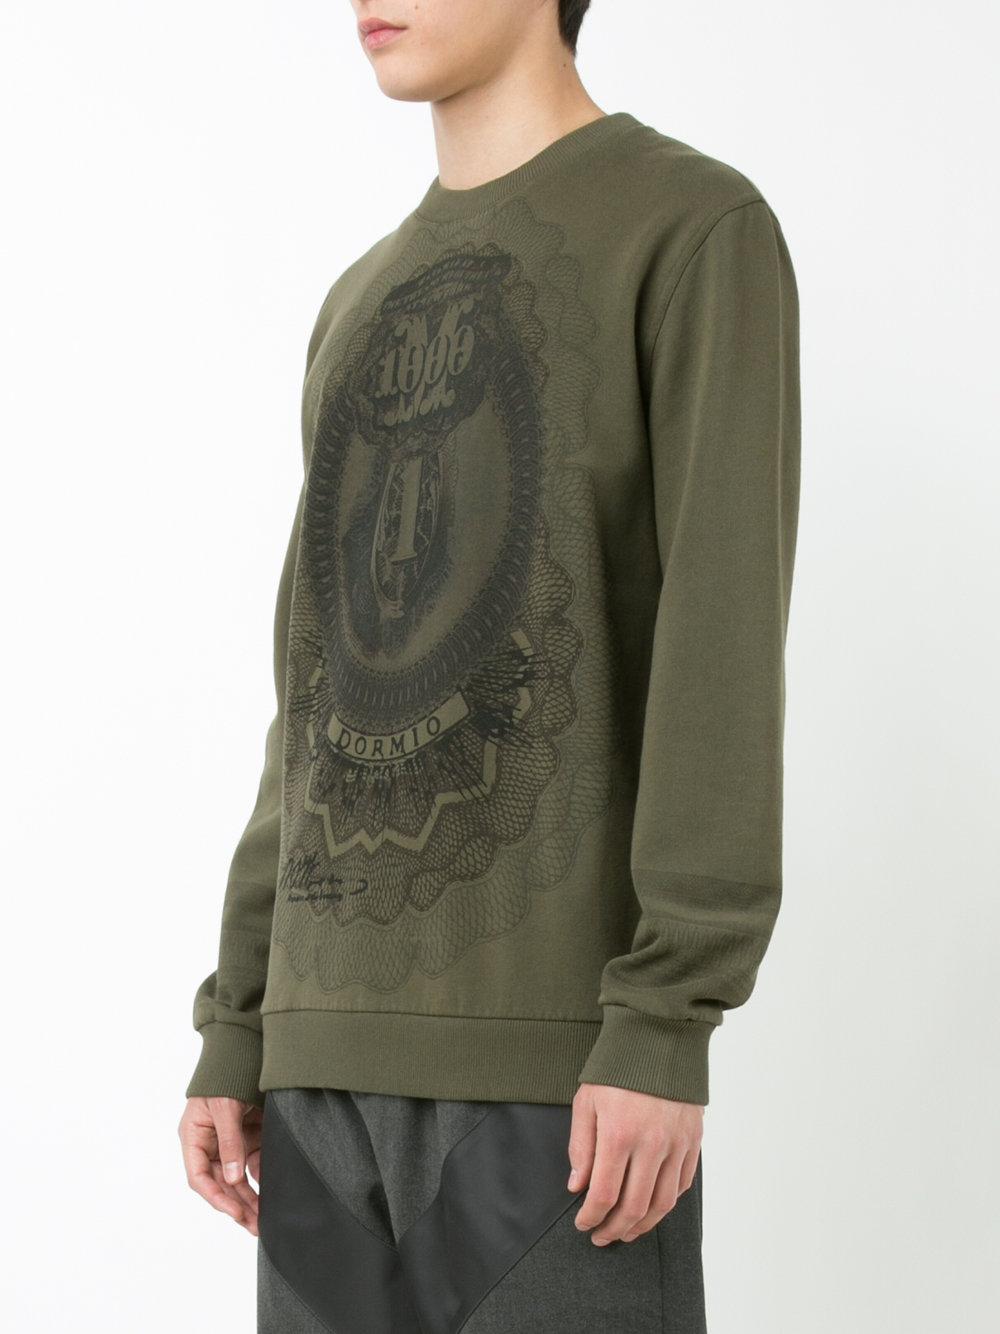 Givenchy Printed Sweatshirt in Green for Men - Lyst